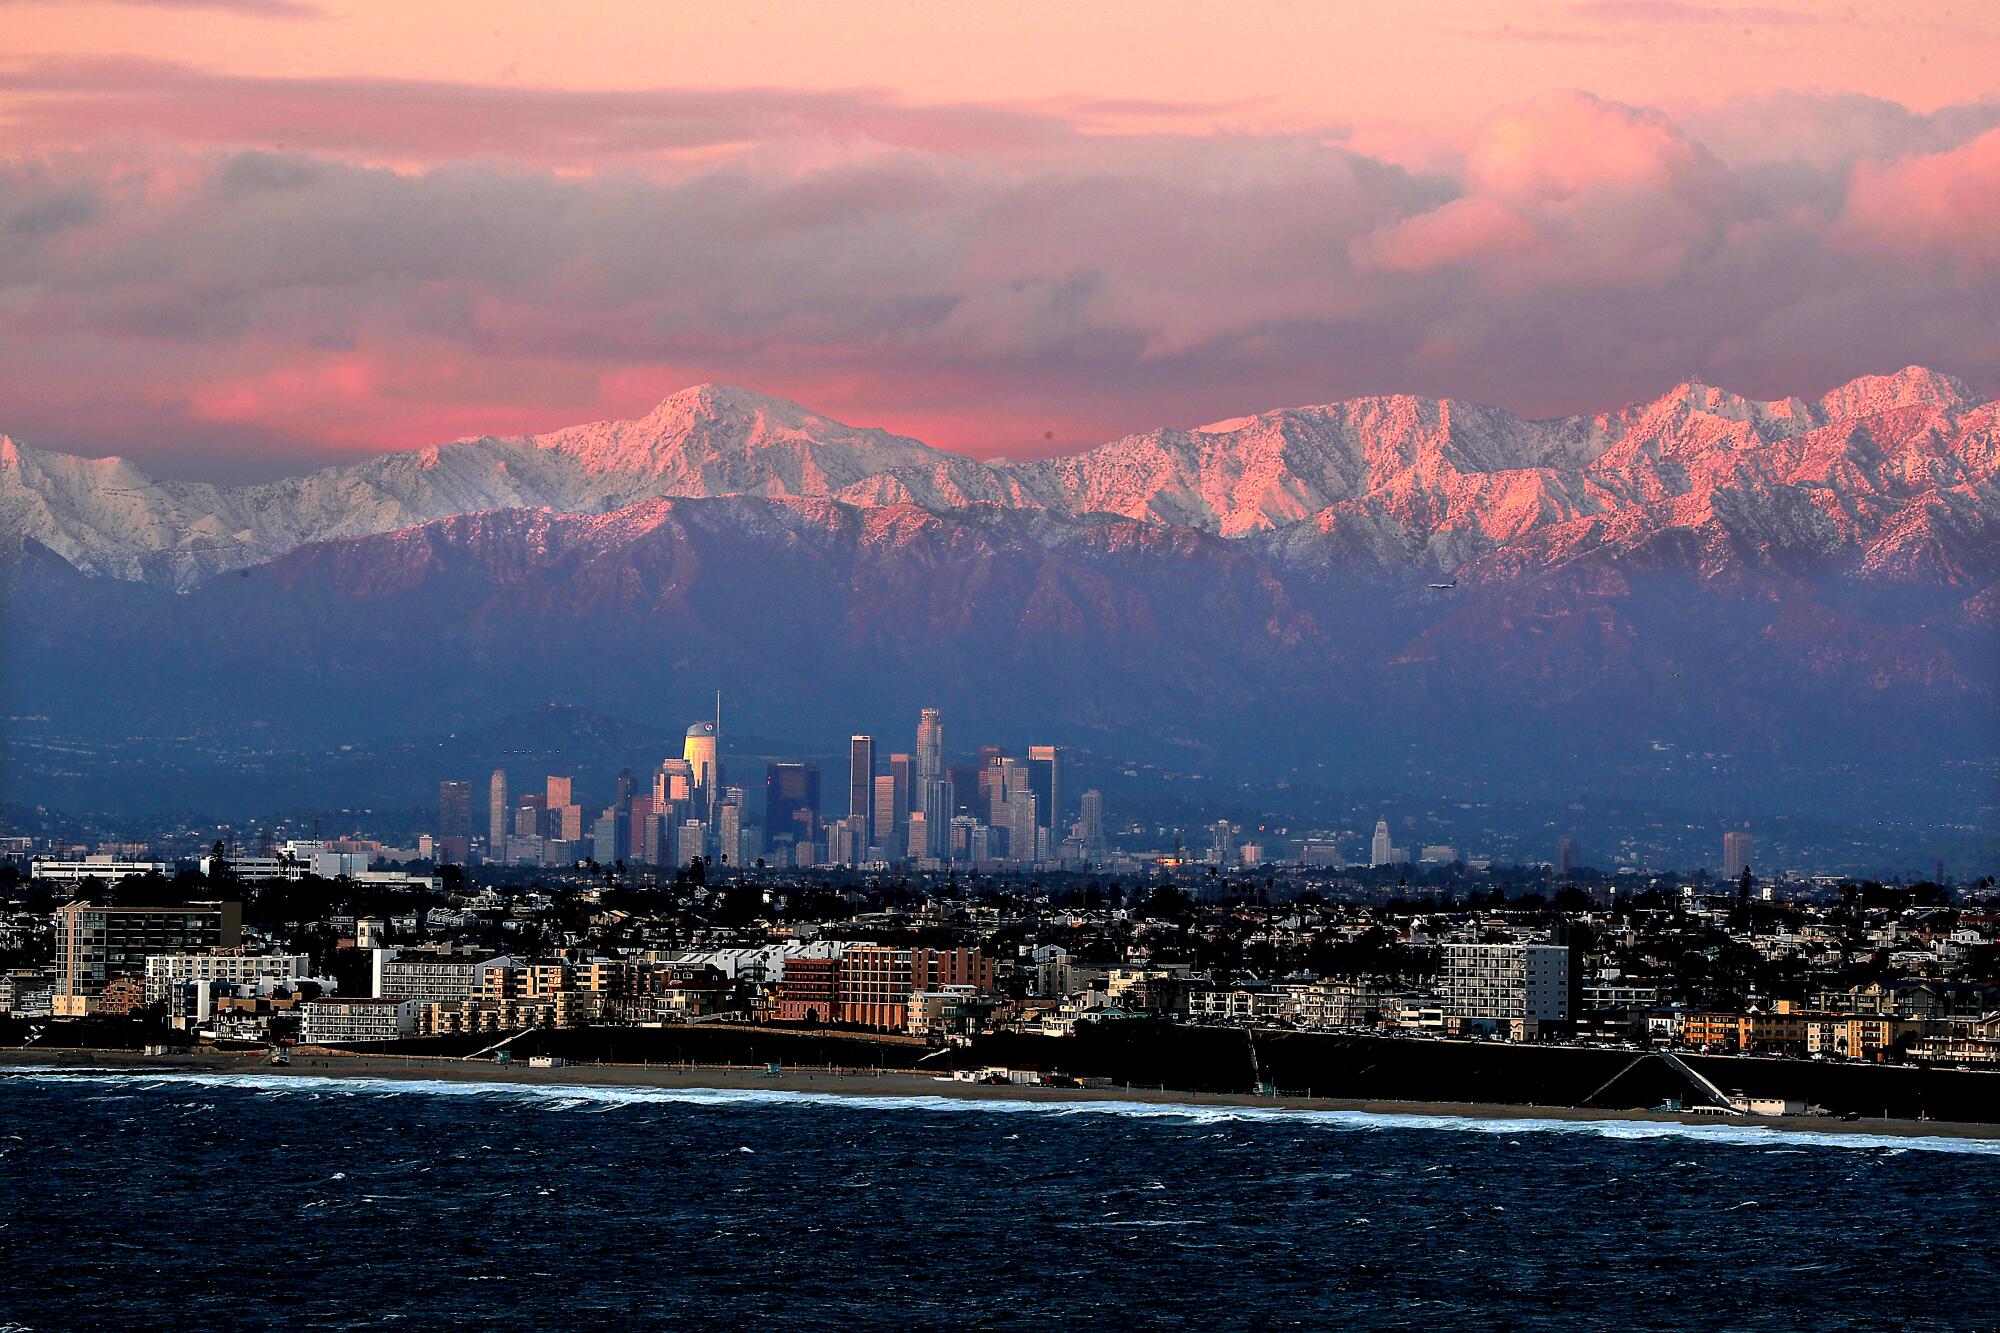 Snow-covered mountains provide a backdrop for the downtown L.A. skyline.